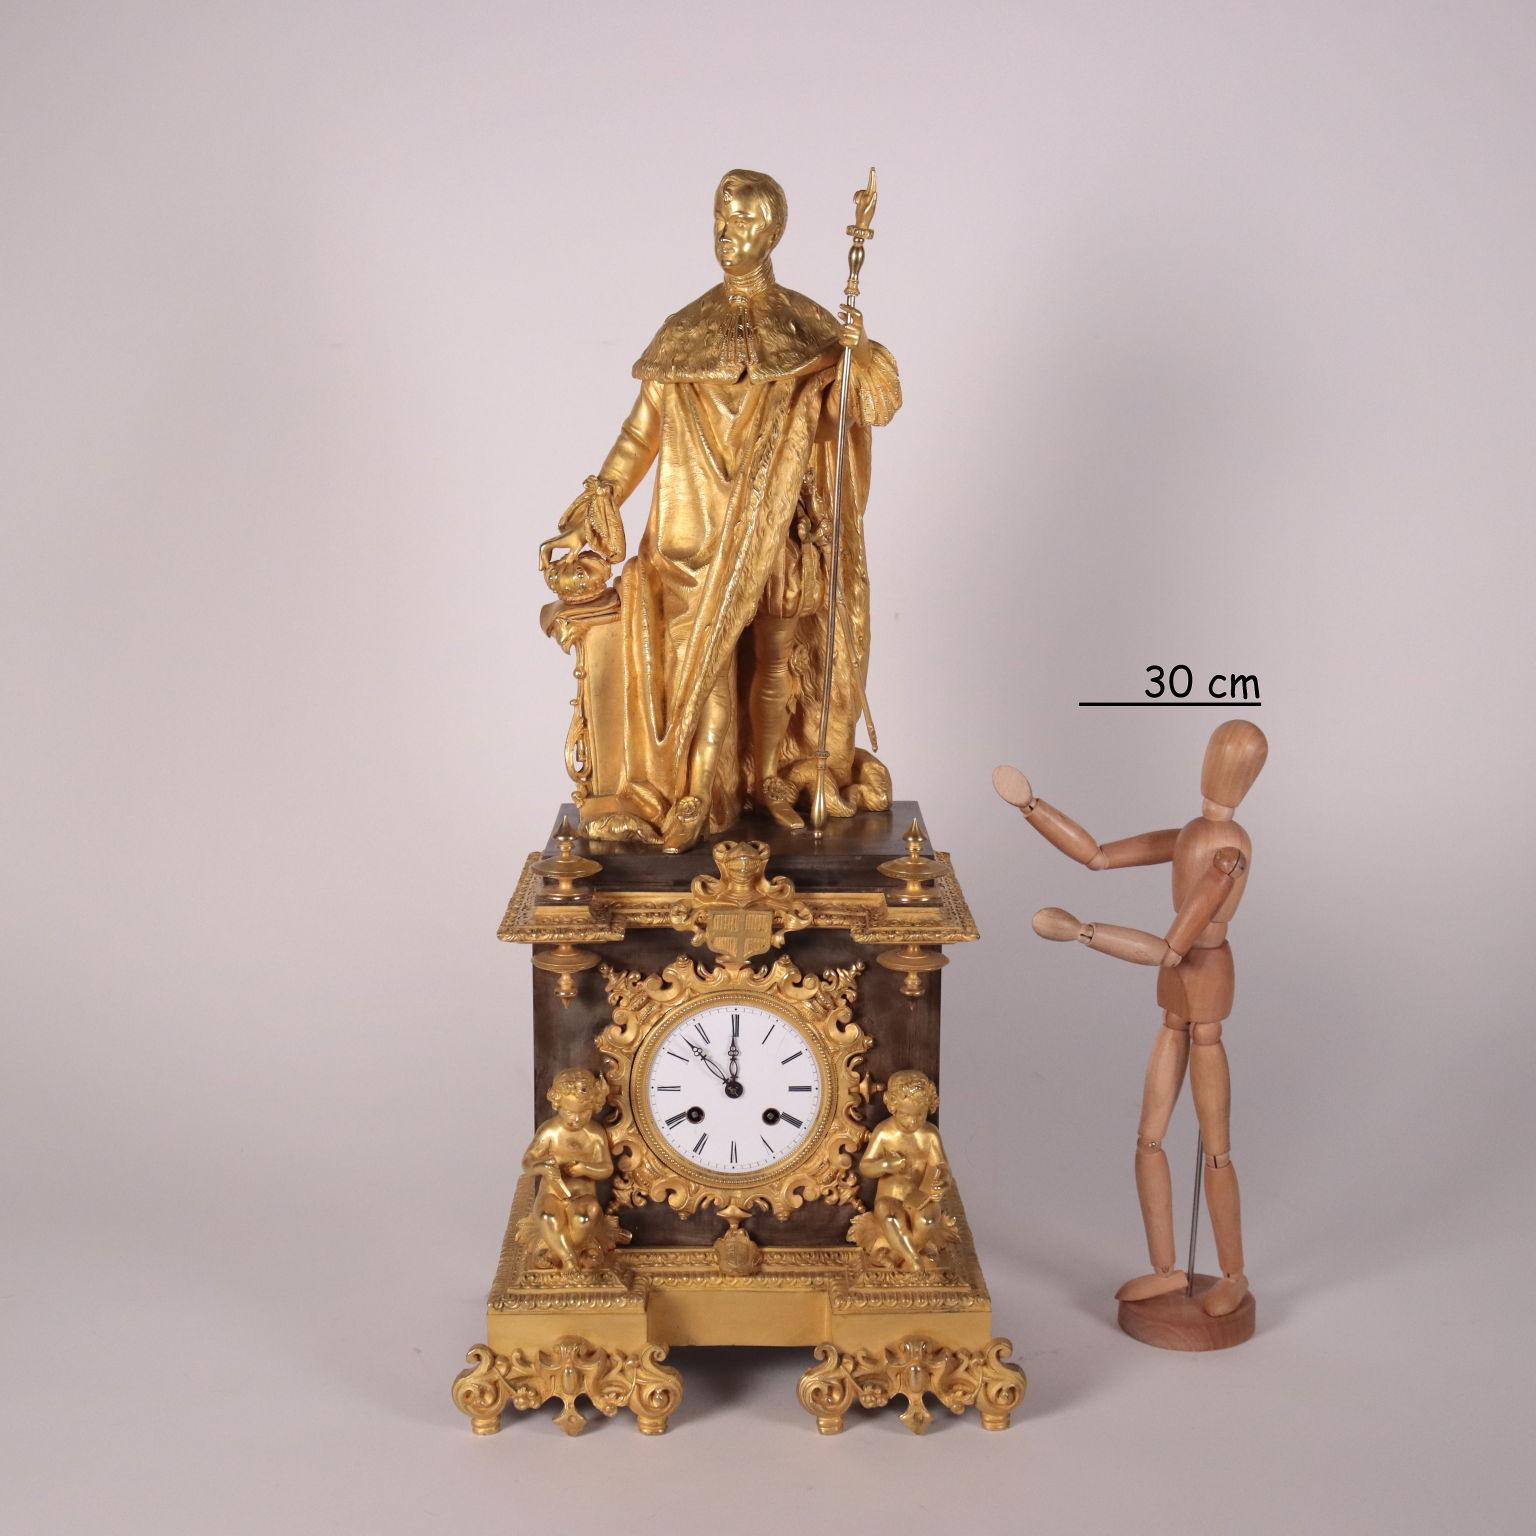 Table clock in bronze with dark and gilded patina. Two cherubs seated and intent on writing flank the clock. The enameled metal display with Roman numeral hours is enclosed within a gilt bronze wreath. At the top there is a statue of an emperor; the